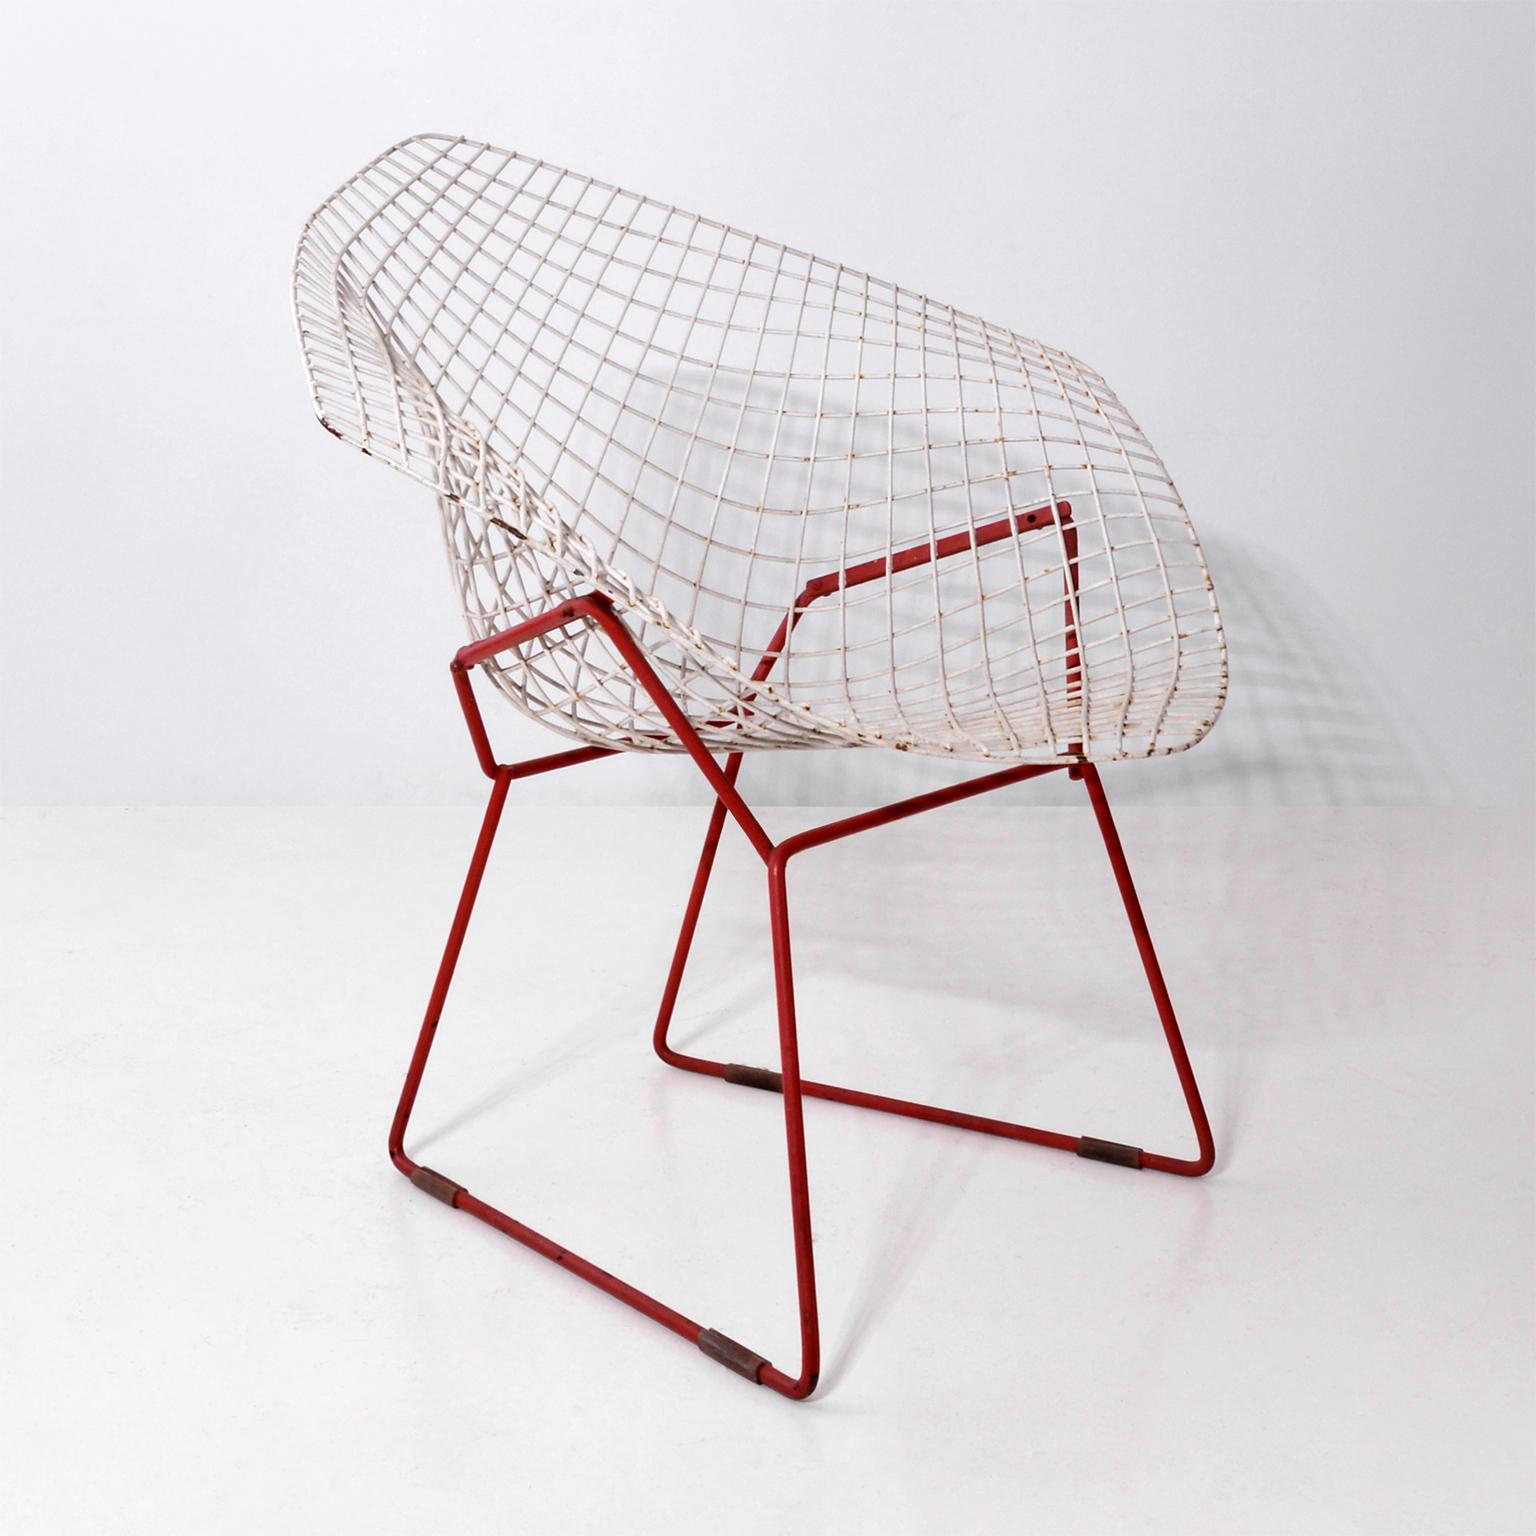 Early diamond chair by Harry Bertoia in white and dark red enameled metal. The chair was manufactured by Knoll Associates c. 1956.